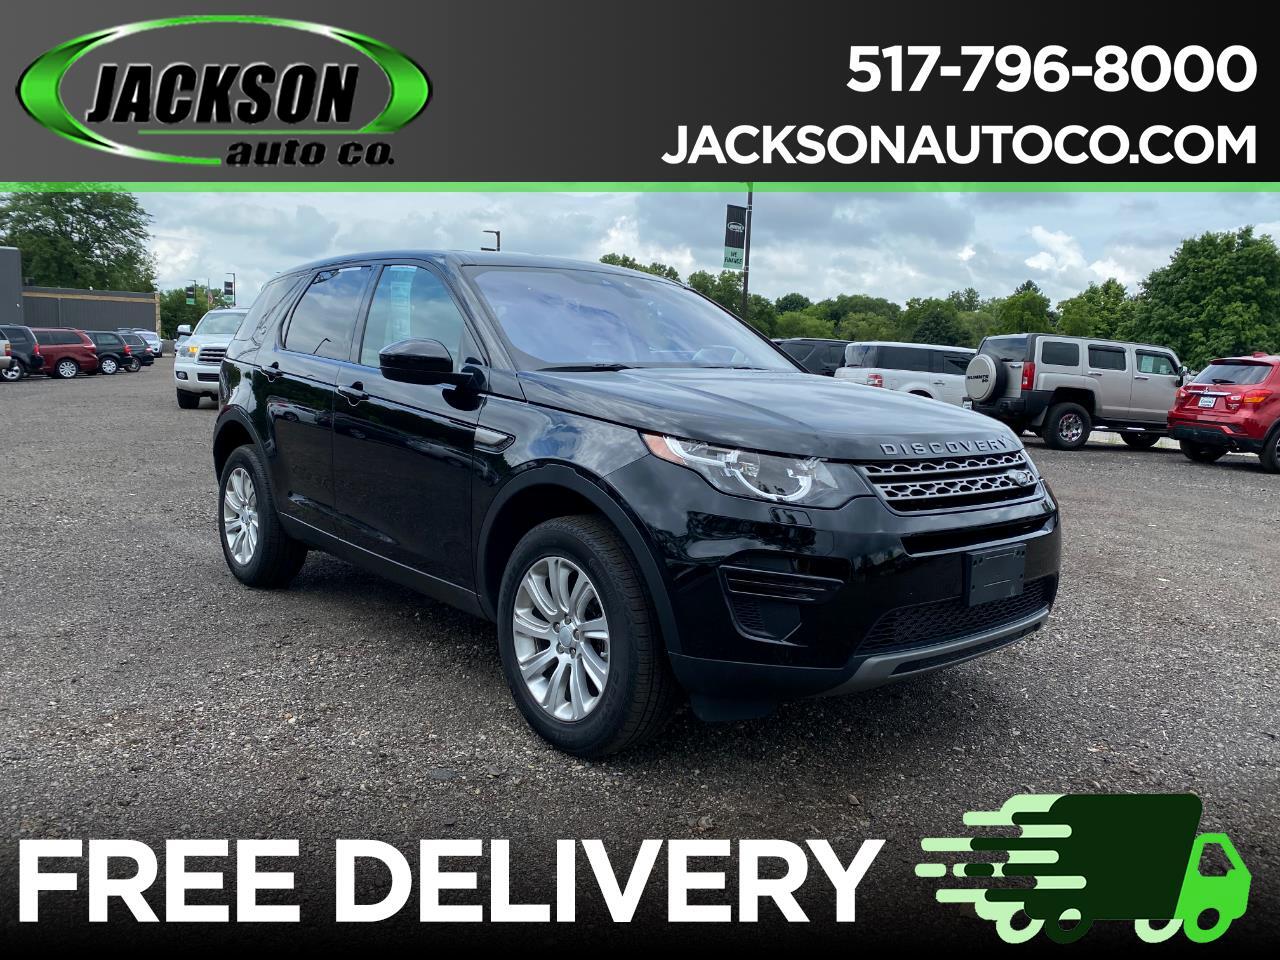 Used 2017 Land Rover Discovery Sport Se 4wd For Sale In Jackson Mi